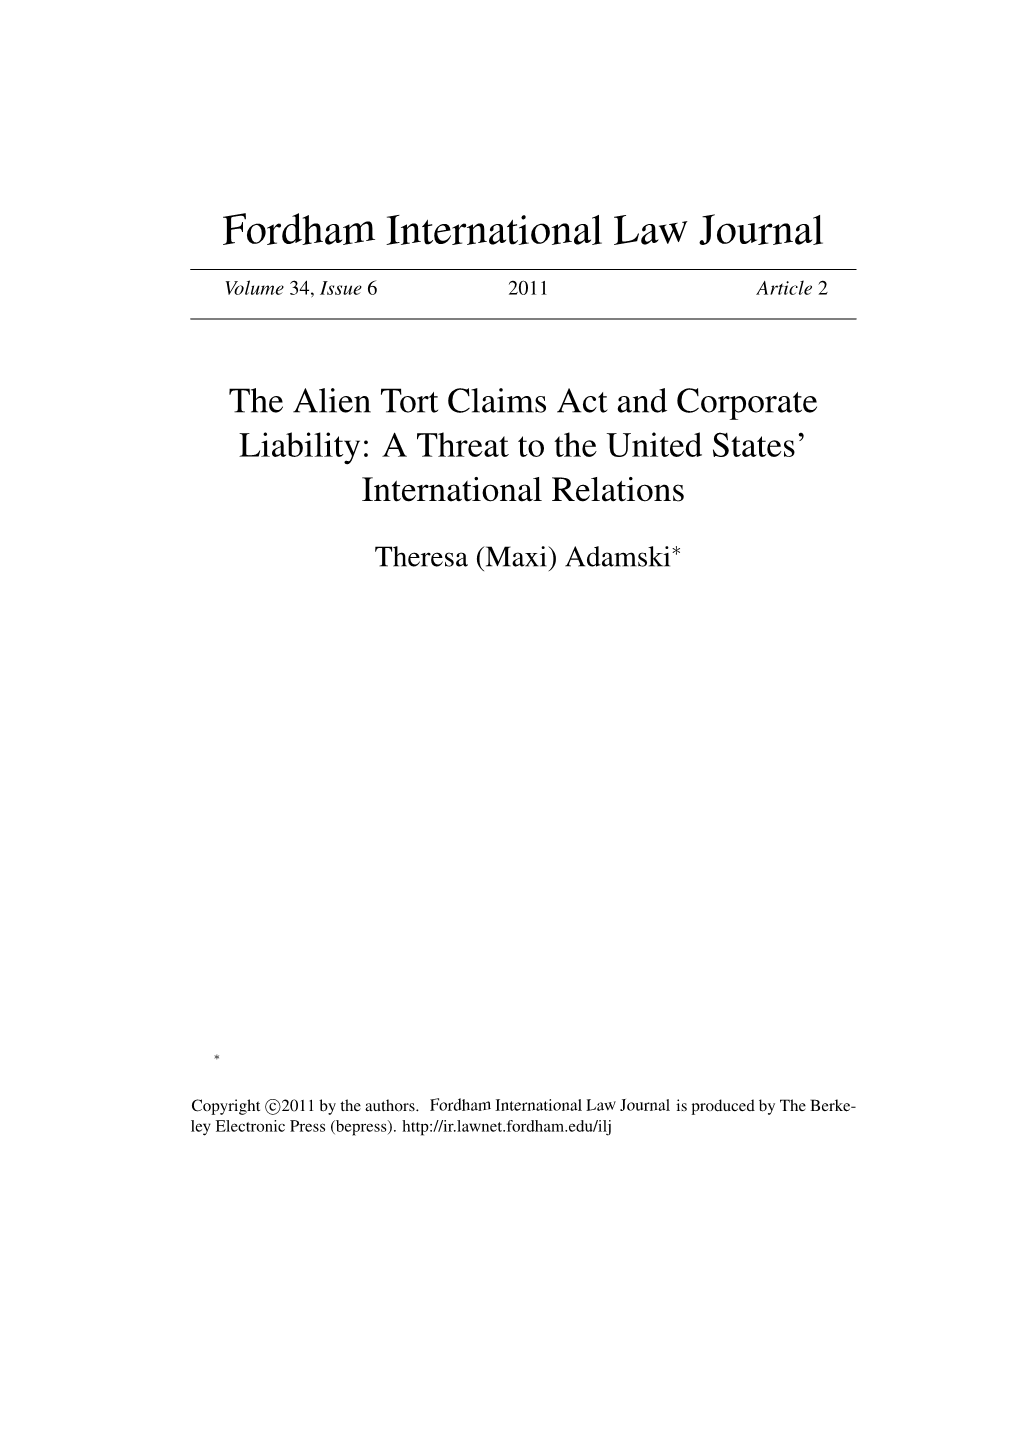 The Alien Tort Claims Act and Corporate Liability: a Threat to the United States’ International Relations